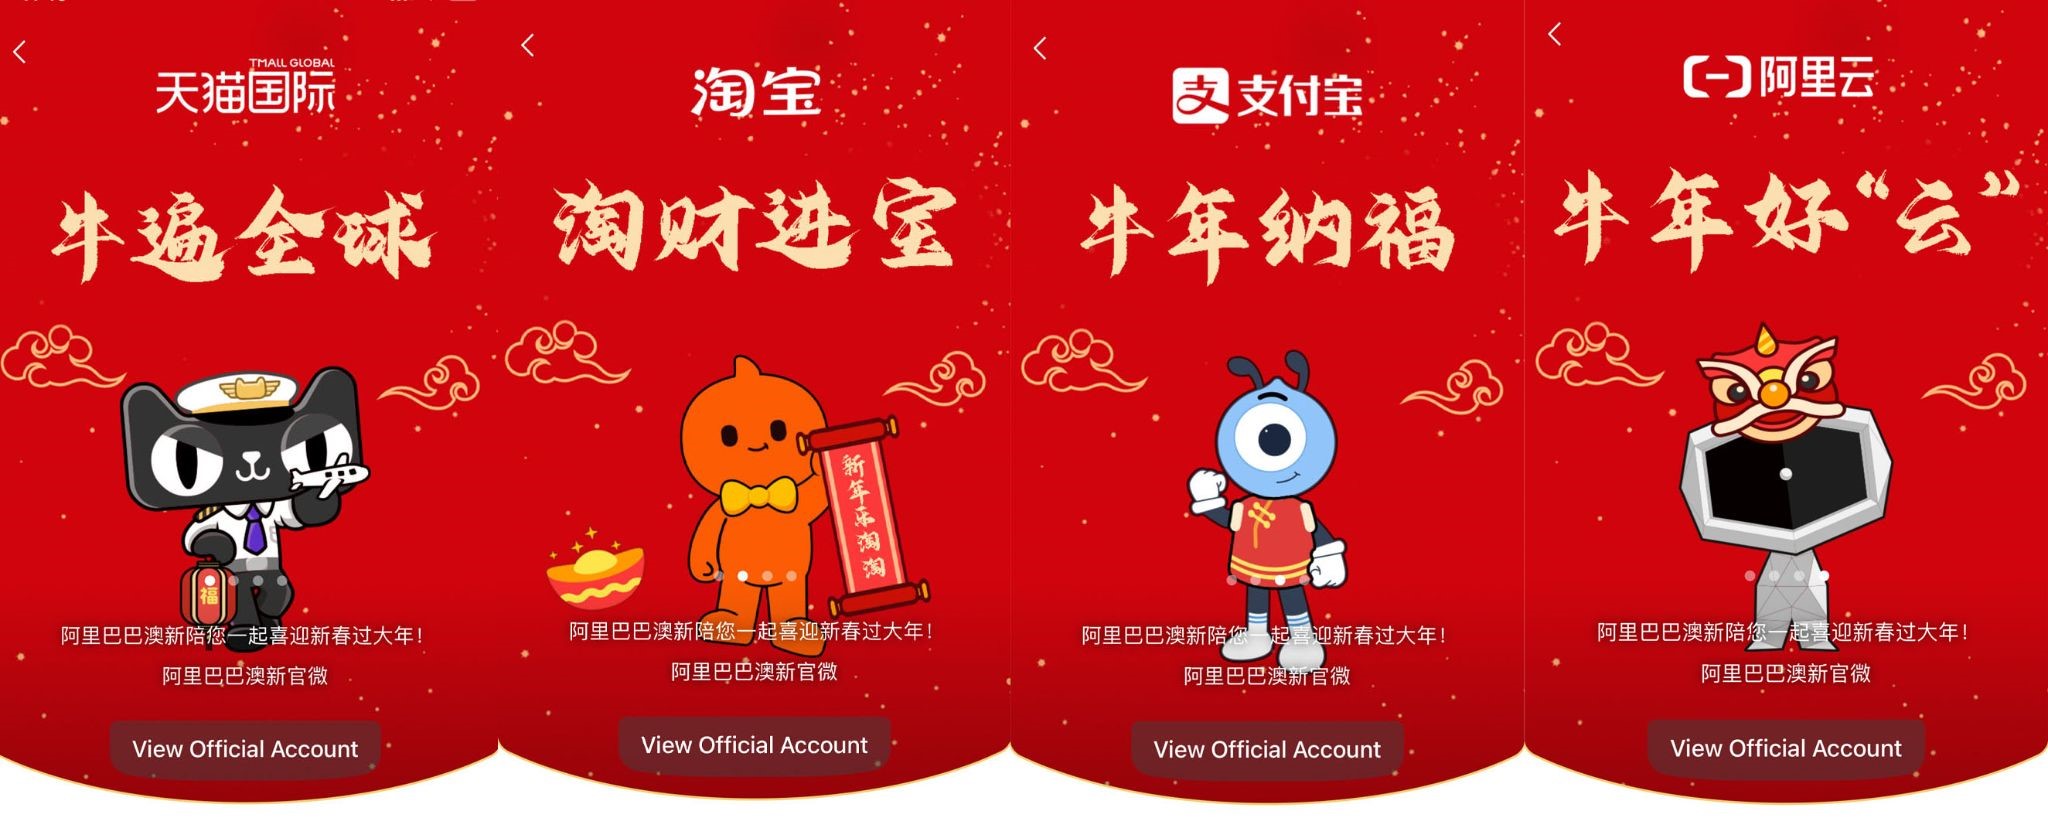 Creating Your Own Red Packet Cover On WeChat